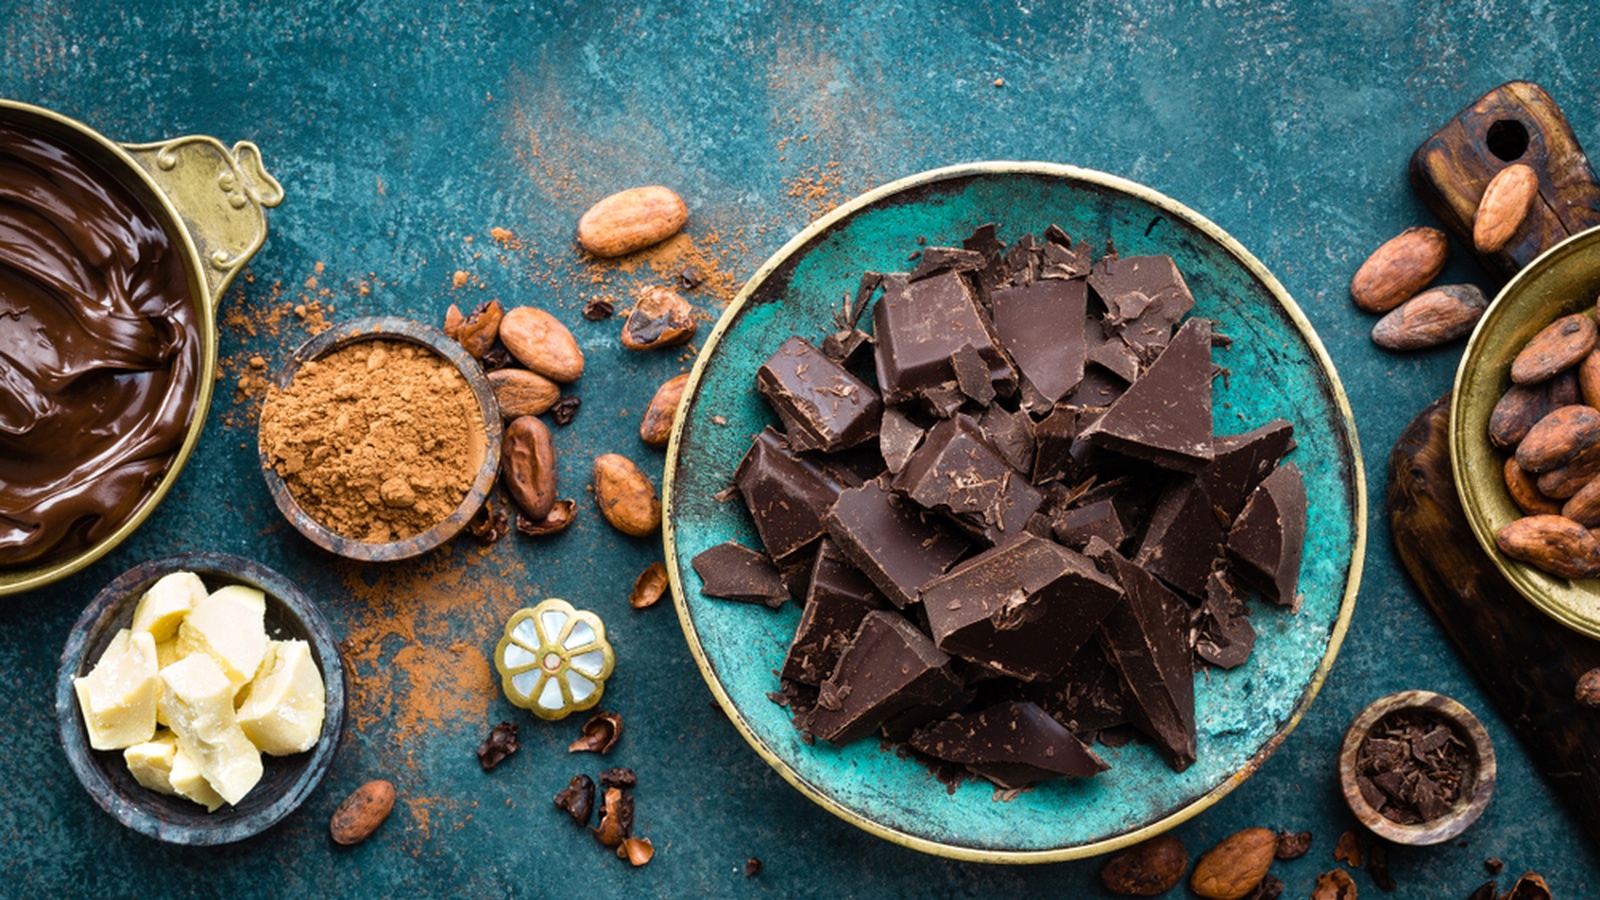 7 Tips For Choosing The Perfect Dark Chocolate